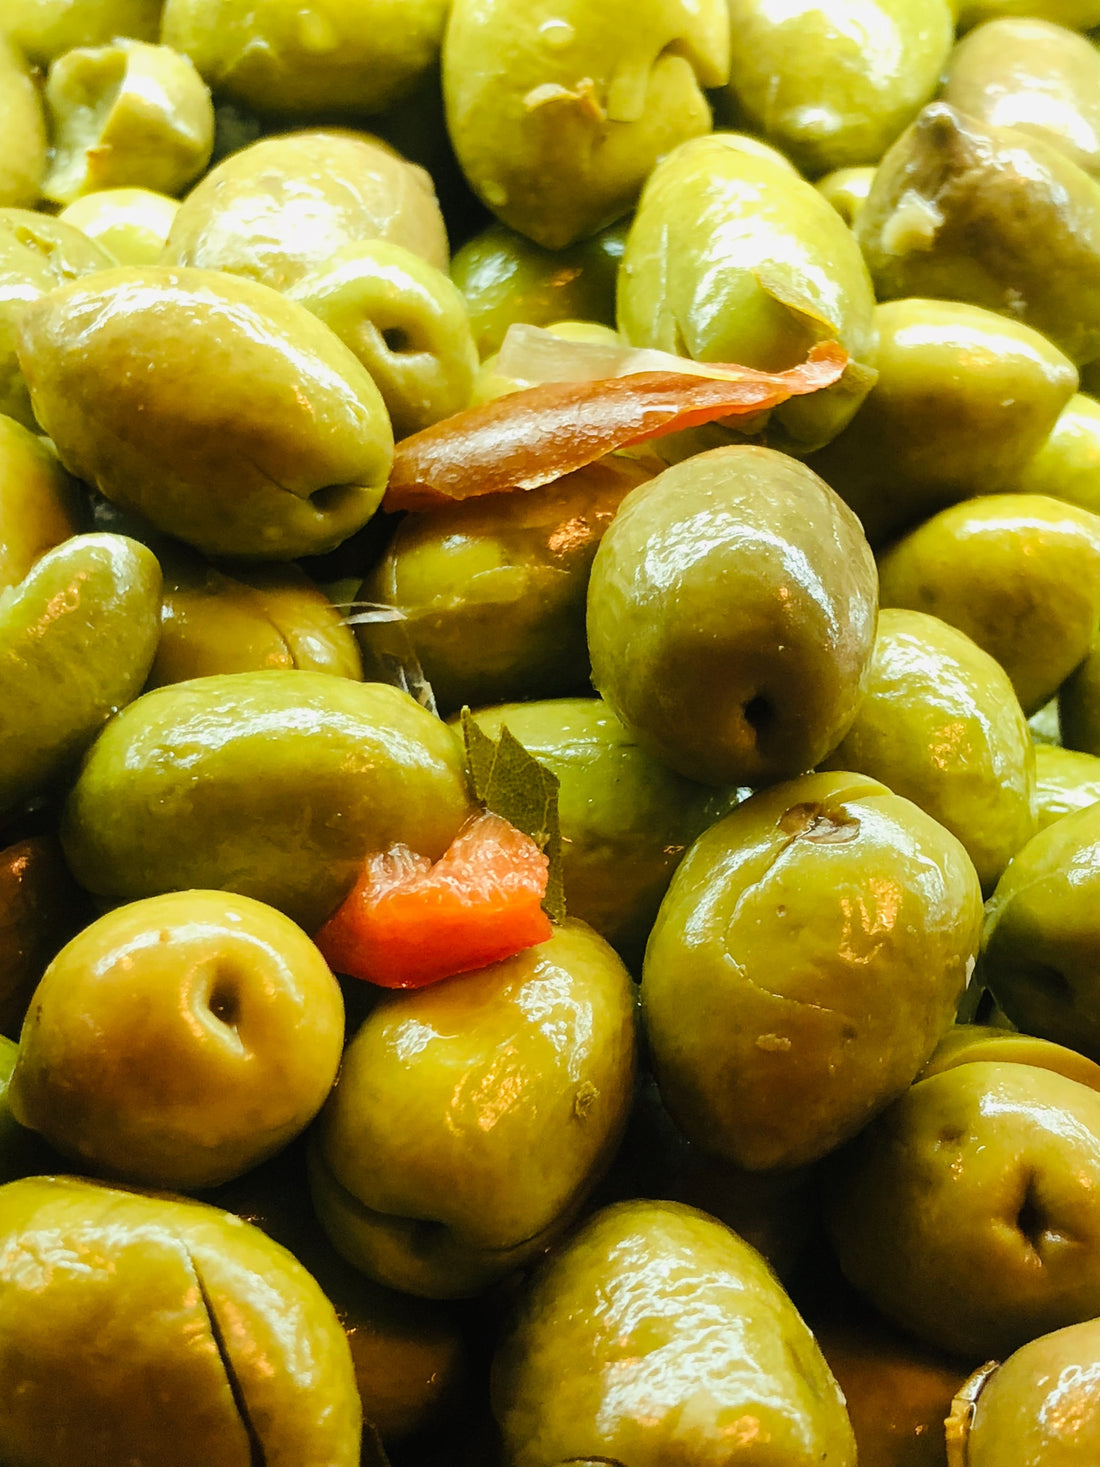 Are Green Olives Good for Diabetes